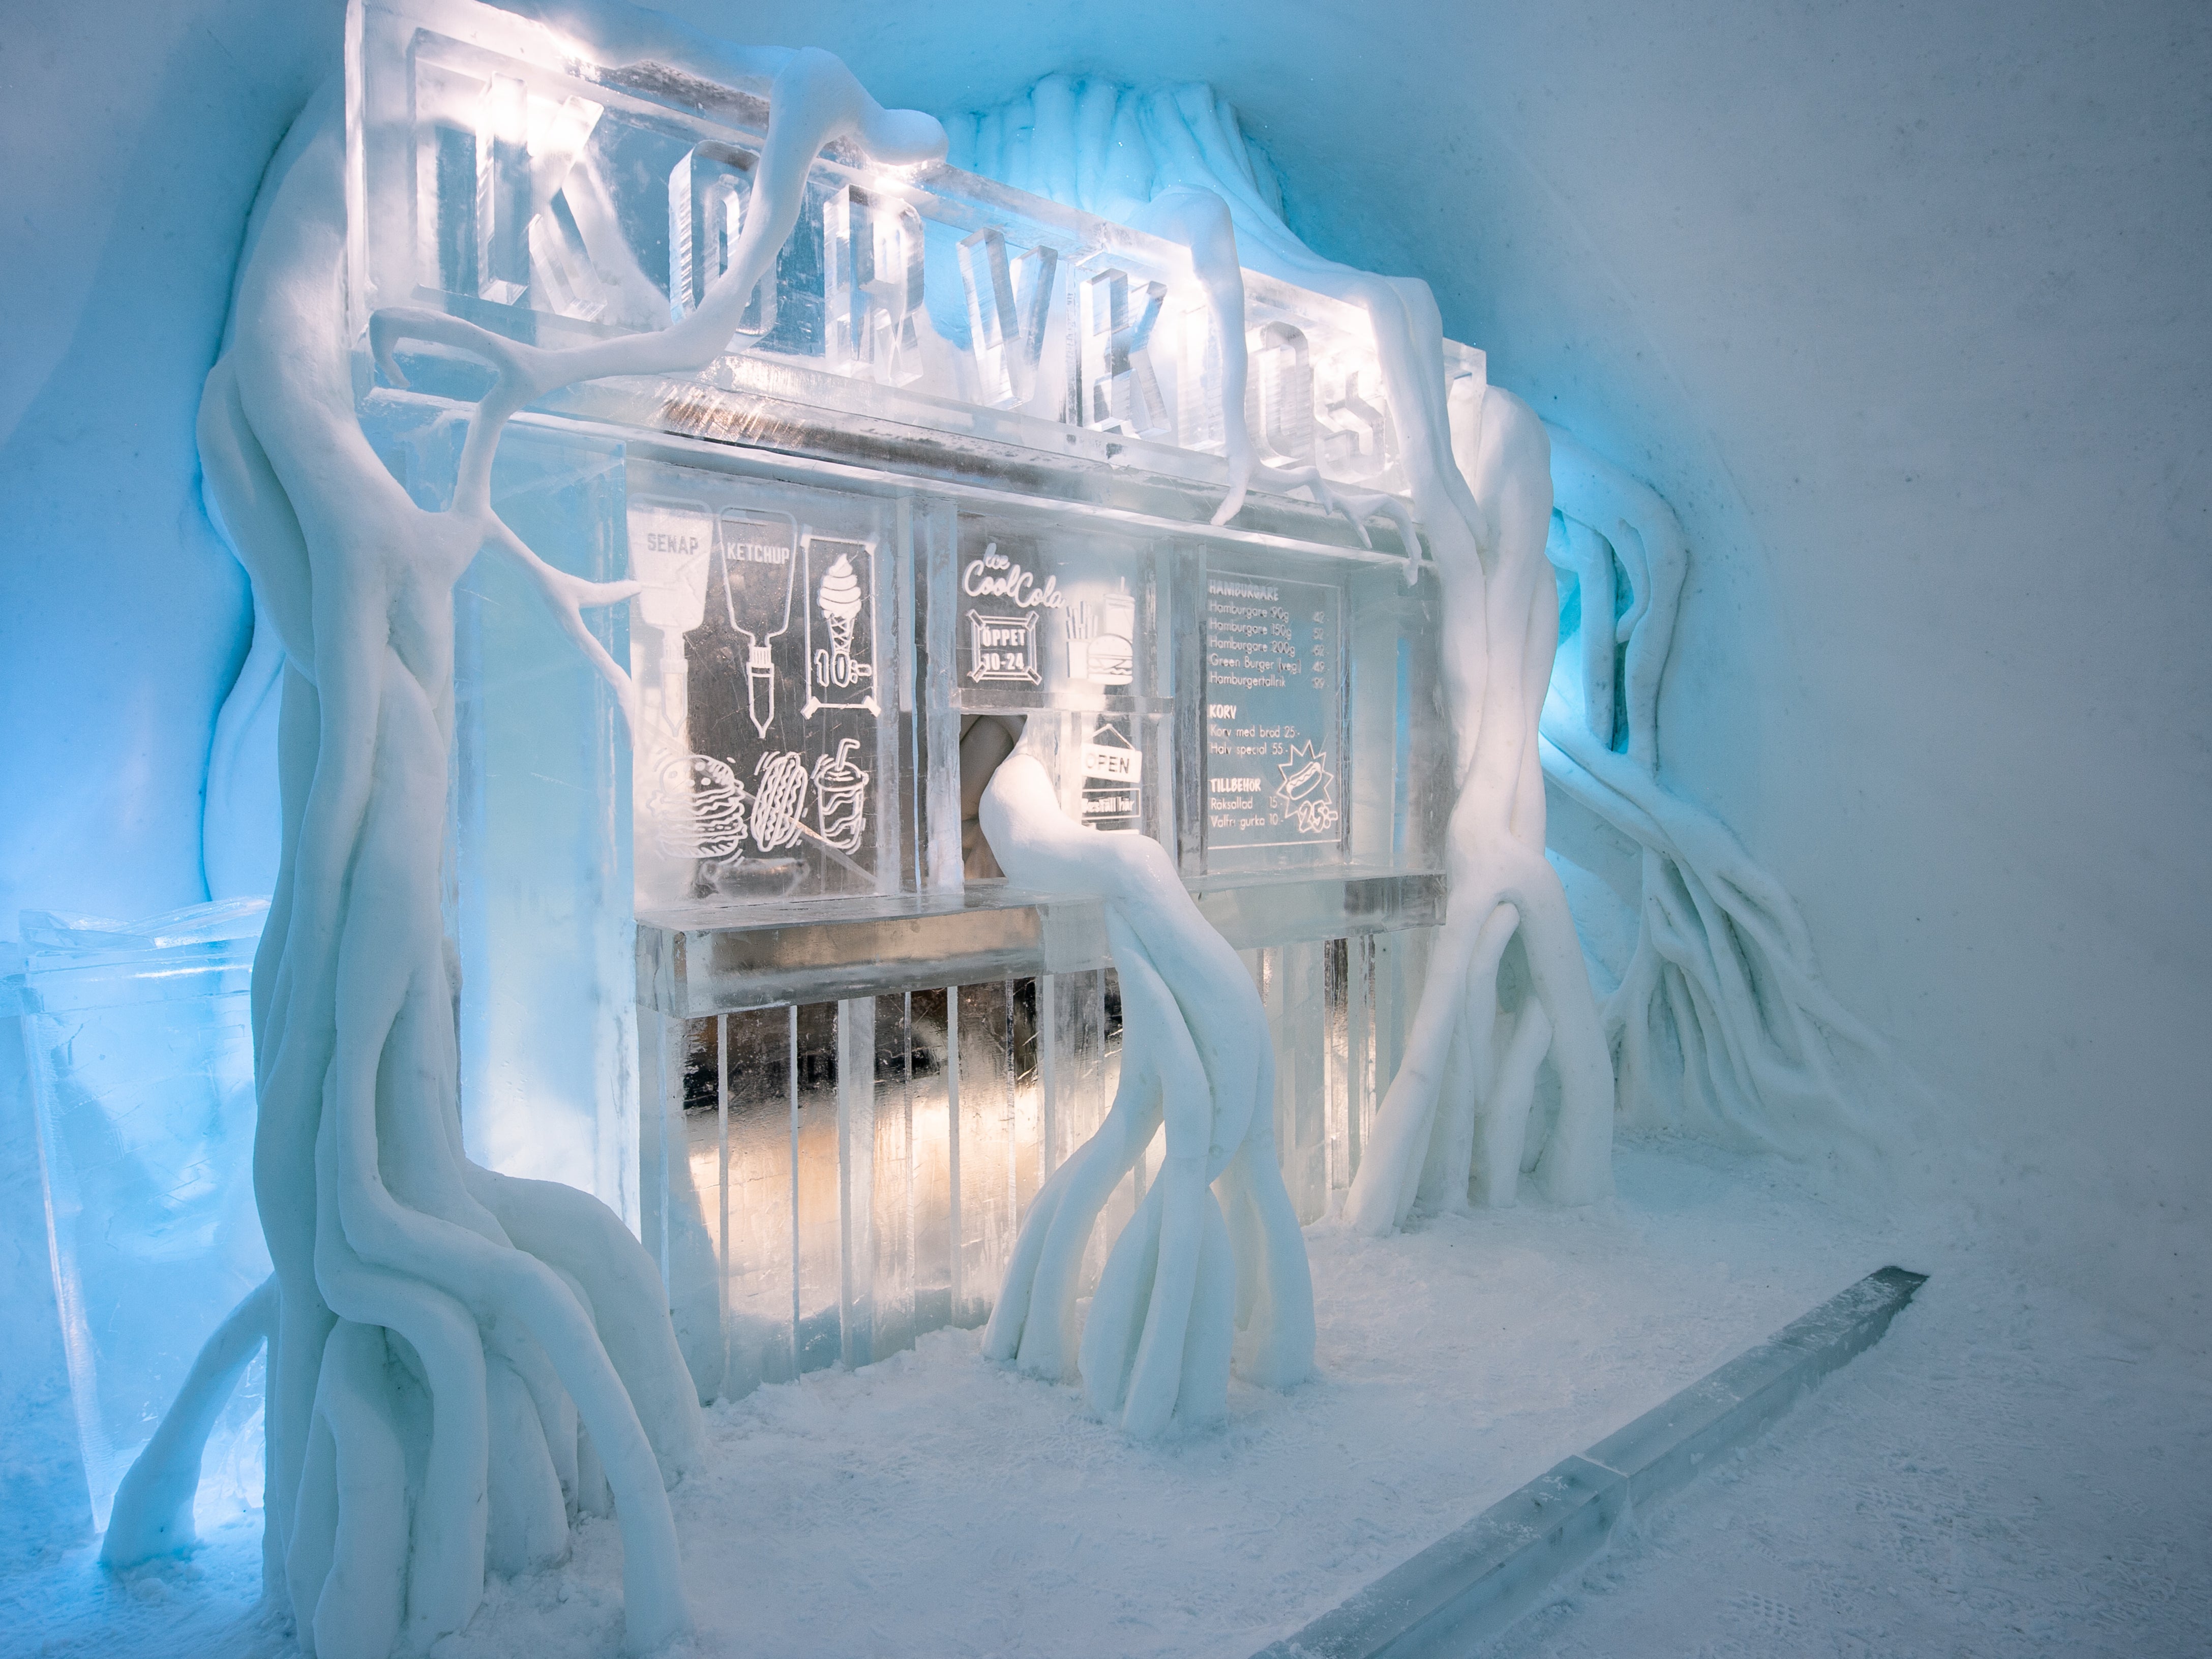 A hot dog stand at the Icehotel